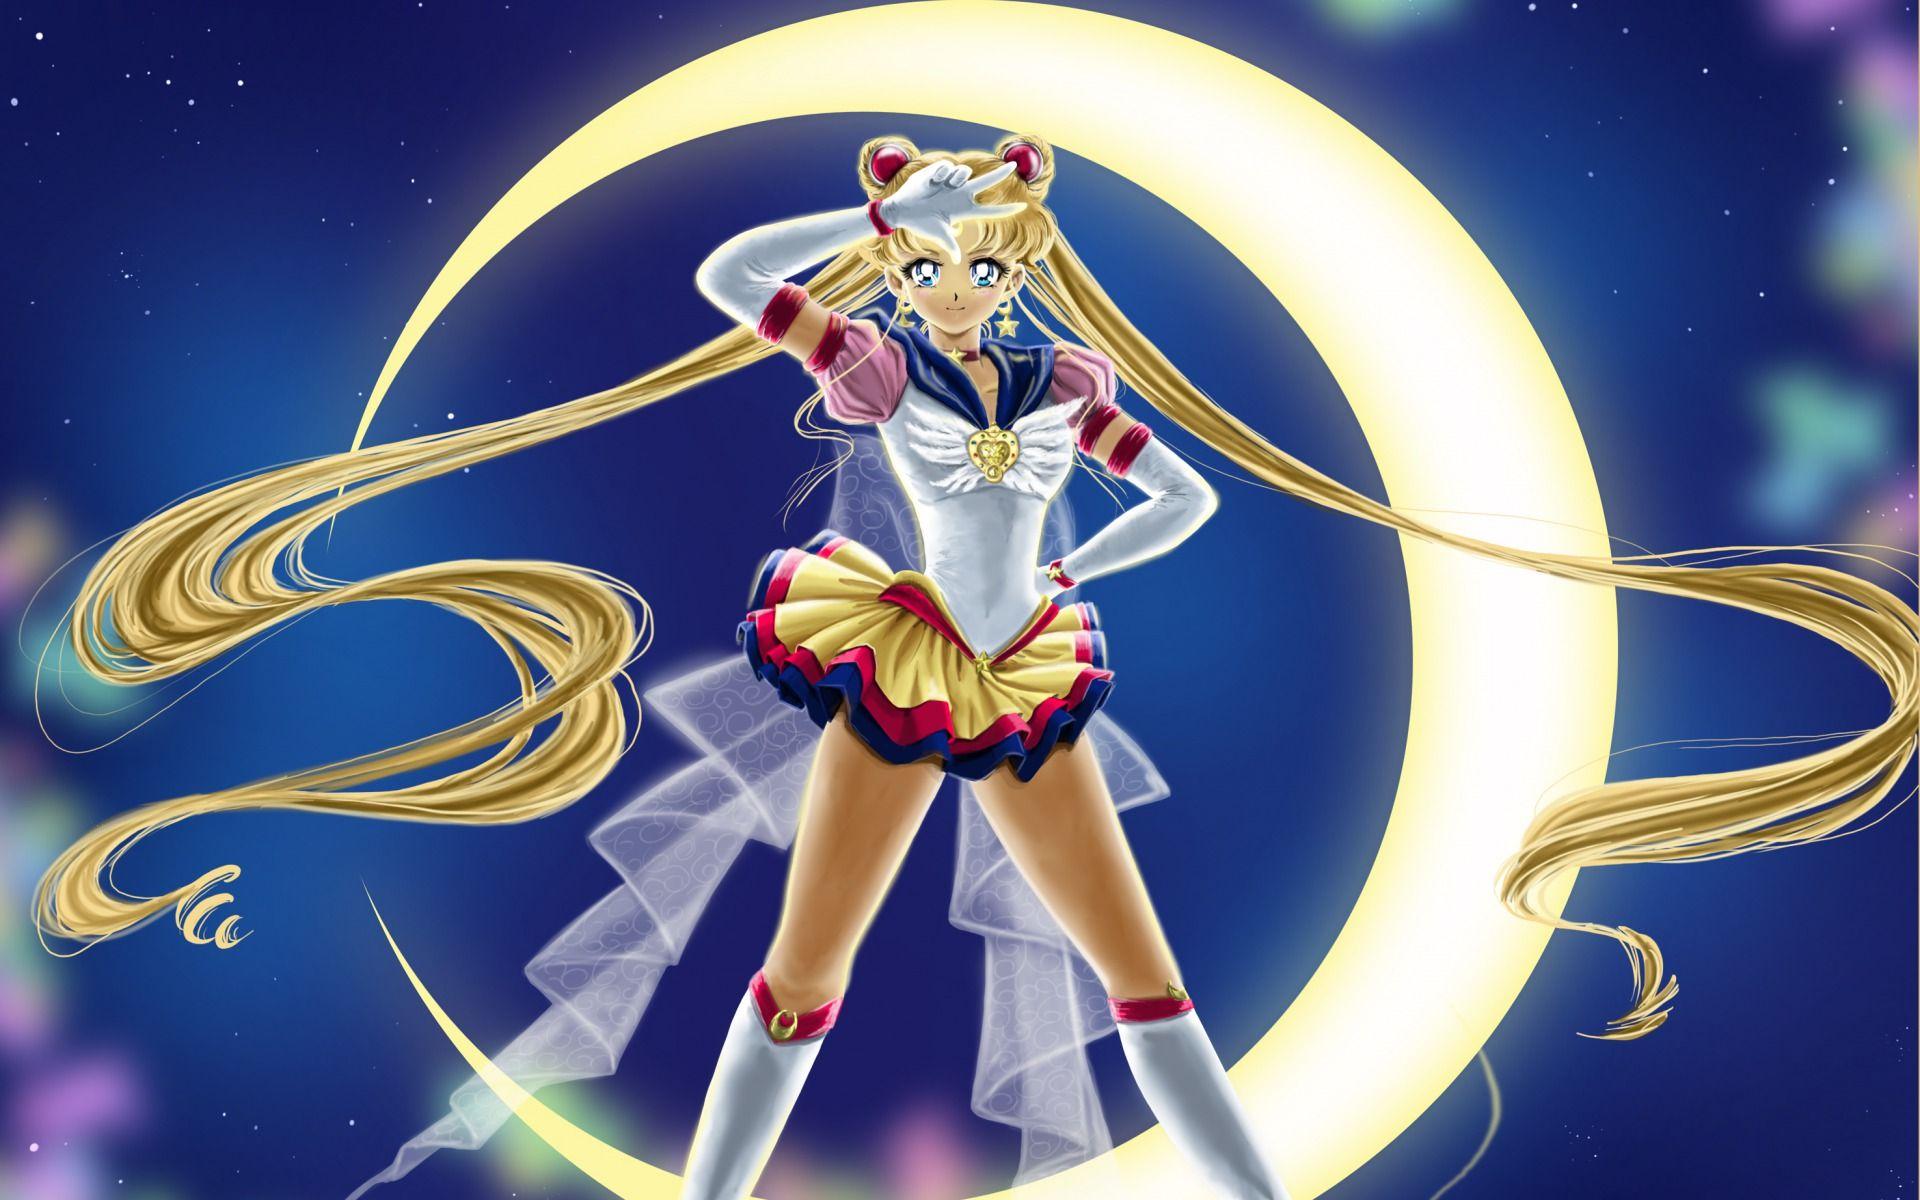 HD wallpaper Cosplay Live Action BSSM Live Action Anime Sailor Moon HD Art   Wallpaper Flare